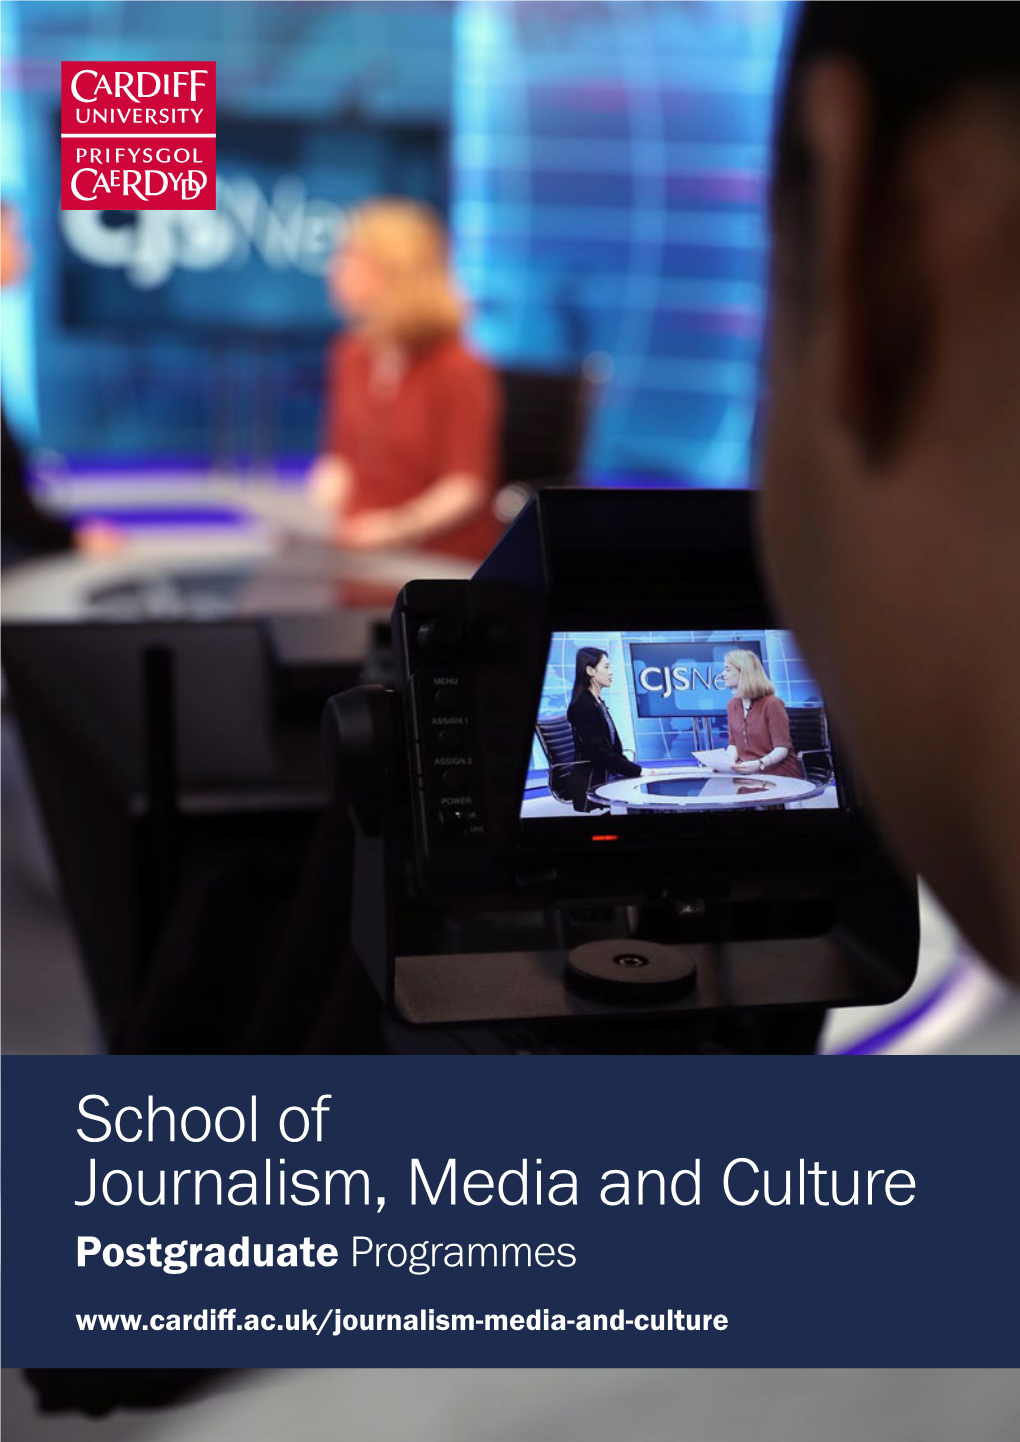 School of Journalism, Media and Culture Postgraduate Programmes Welcome from a Leading University …